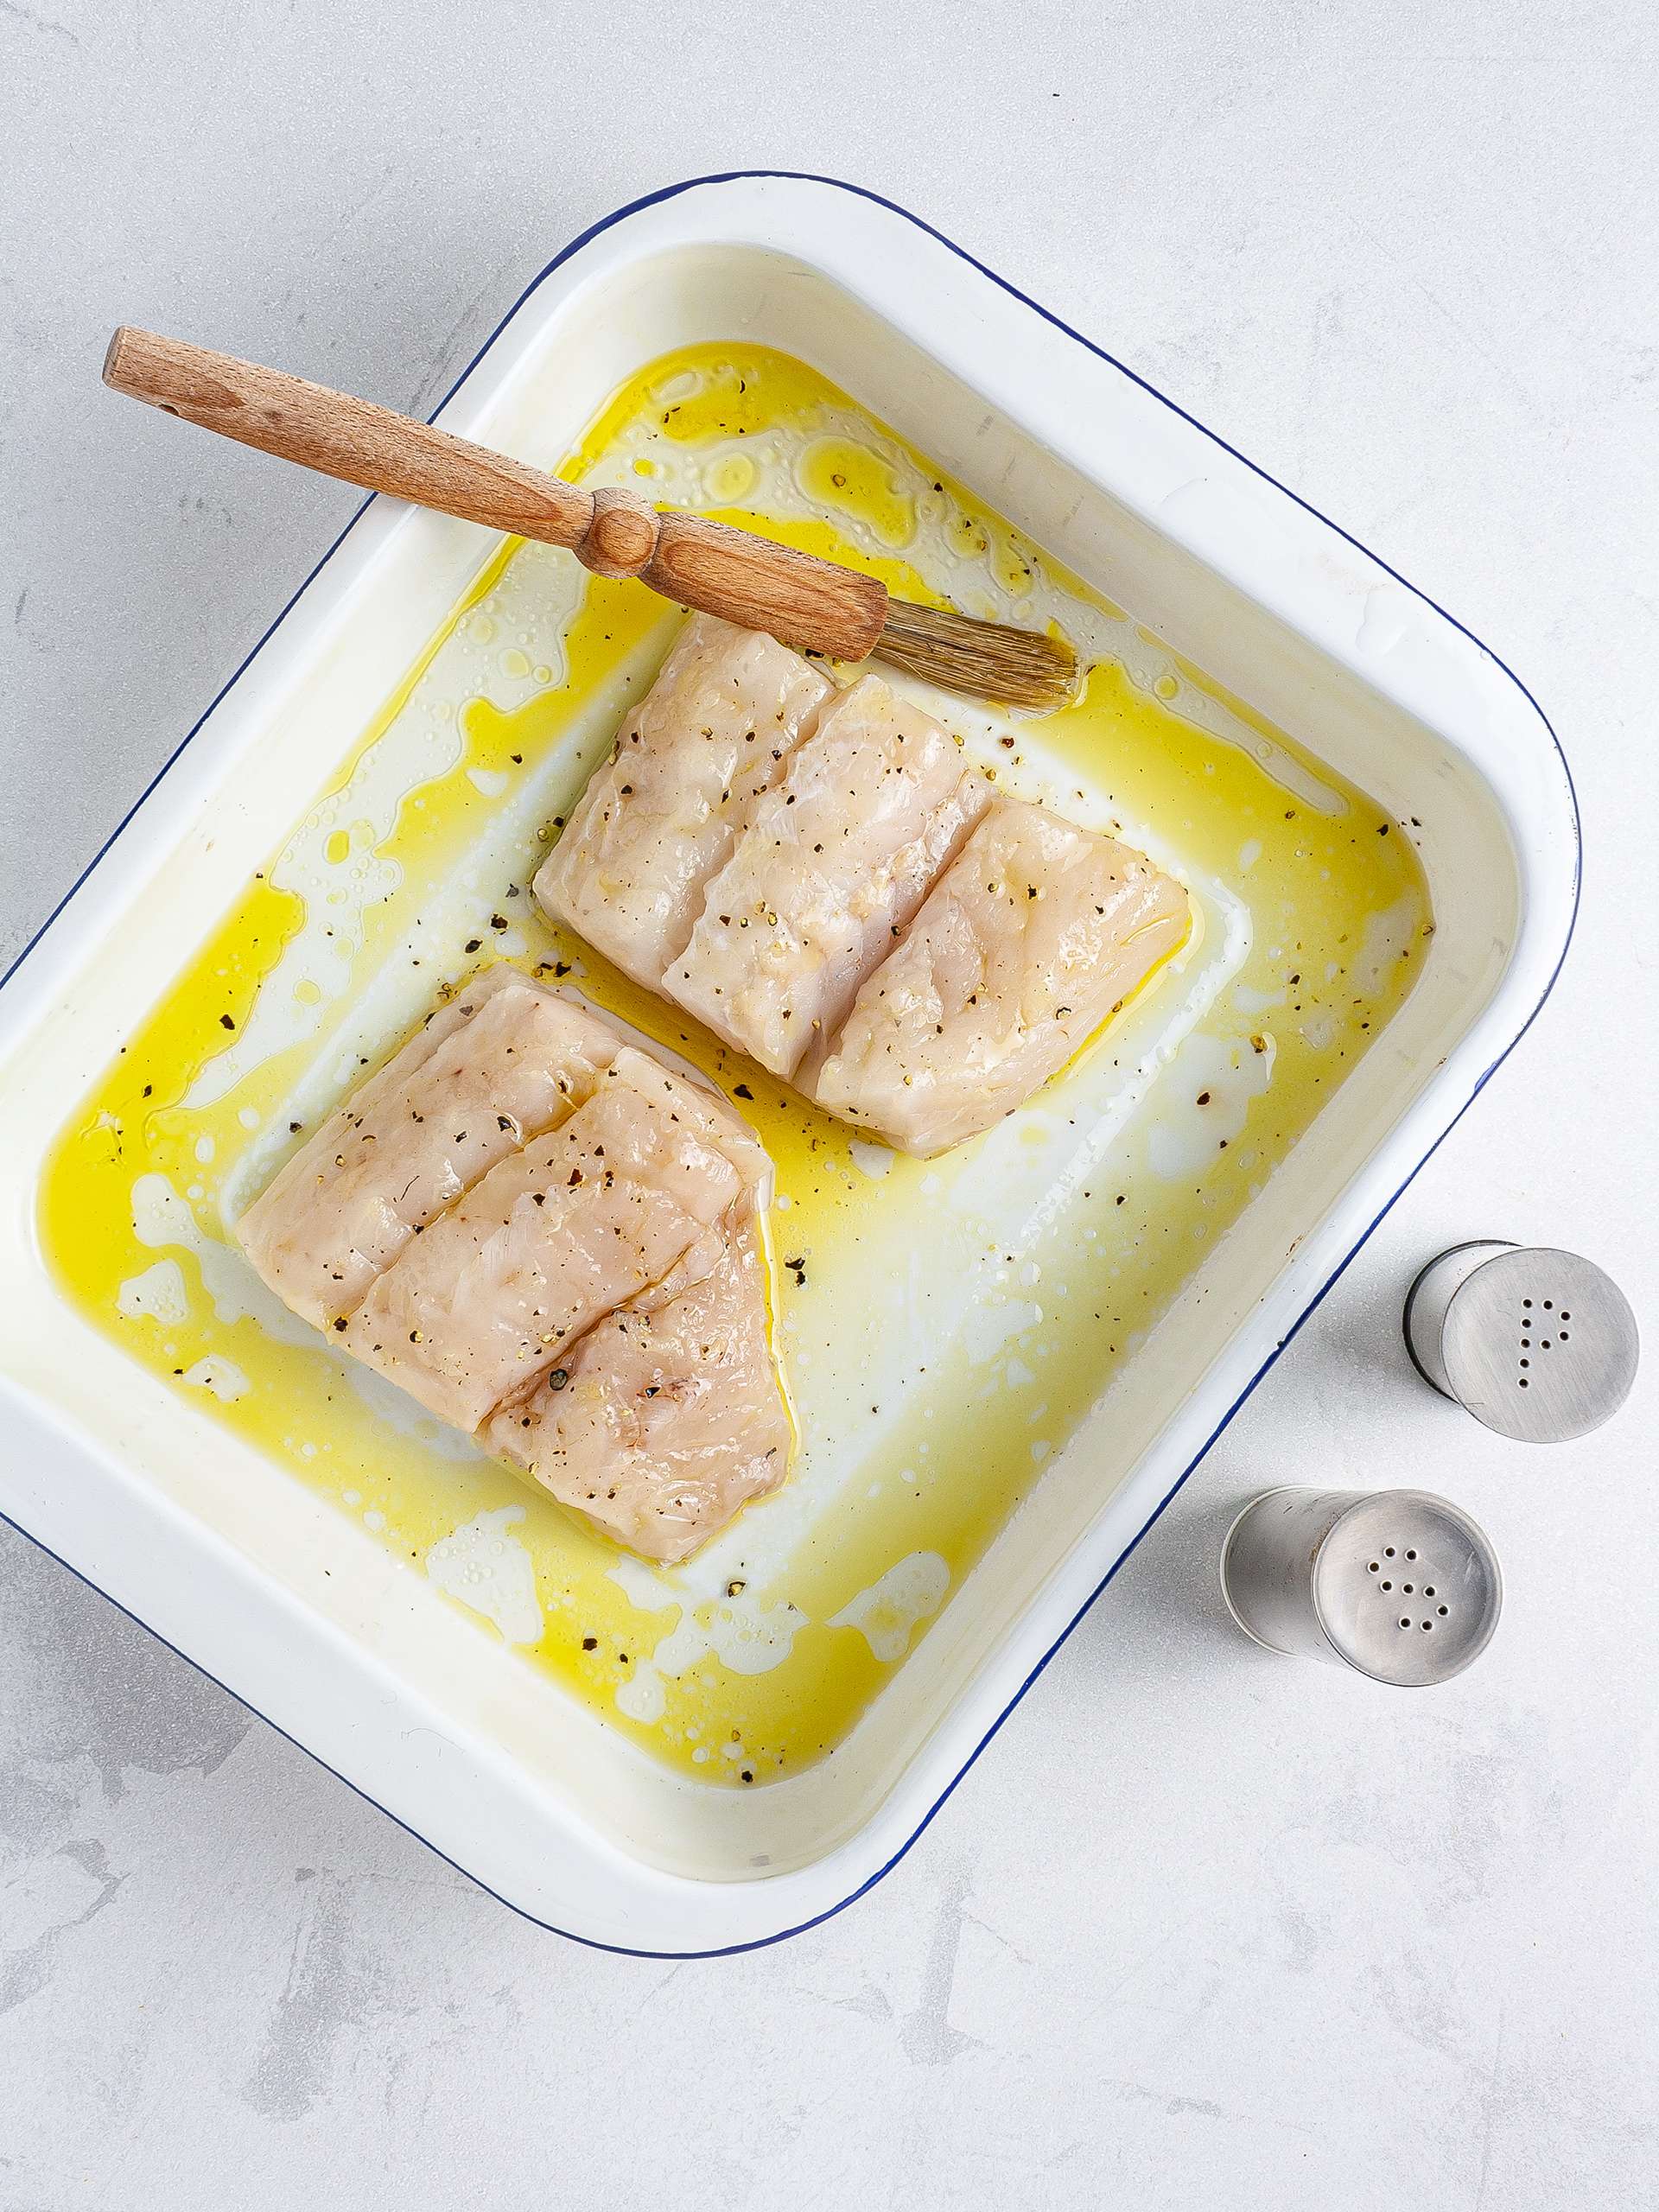 Hake fillet brushed with oil and seasoned with salt and pepper